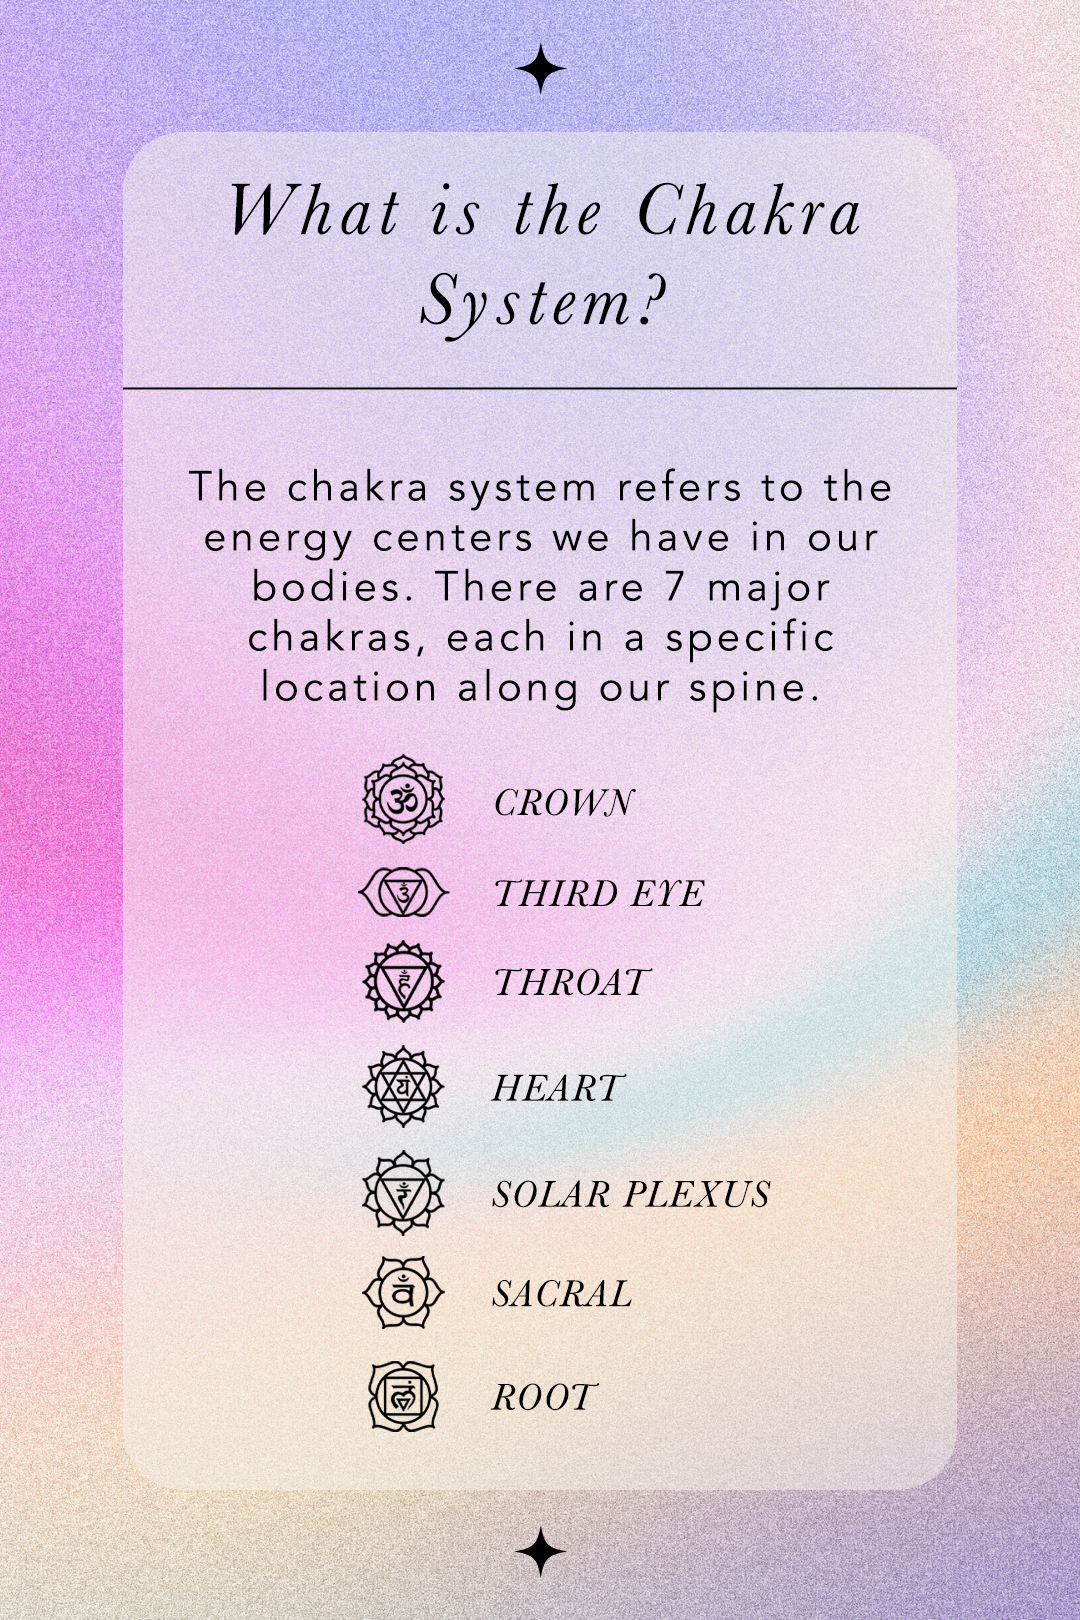 What is the Chakra System? The chakra system refers to the energy centers we have in our bodies. There are 7 major chakras, each in a specific location along our spine. These include the crown, third eye, throat, heart, solar plexus, sacral, and root chakras.